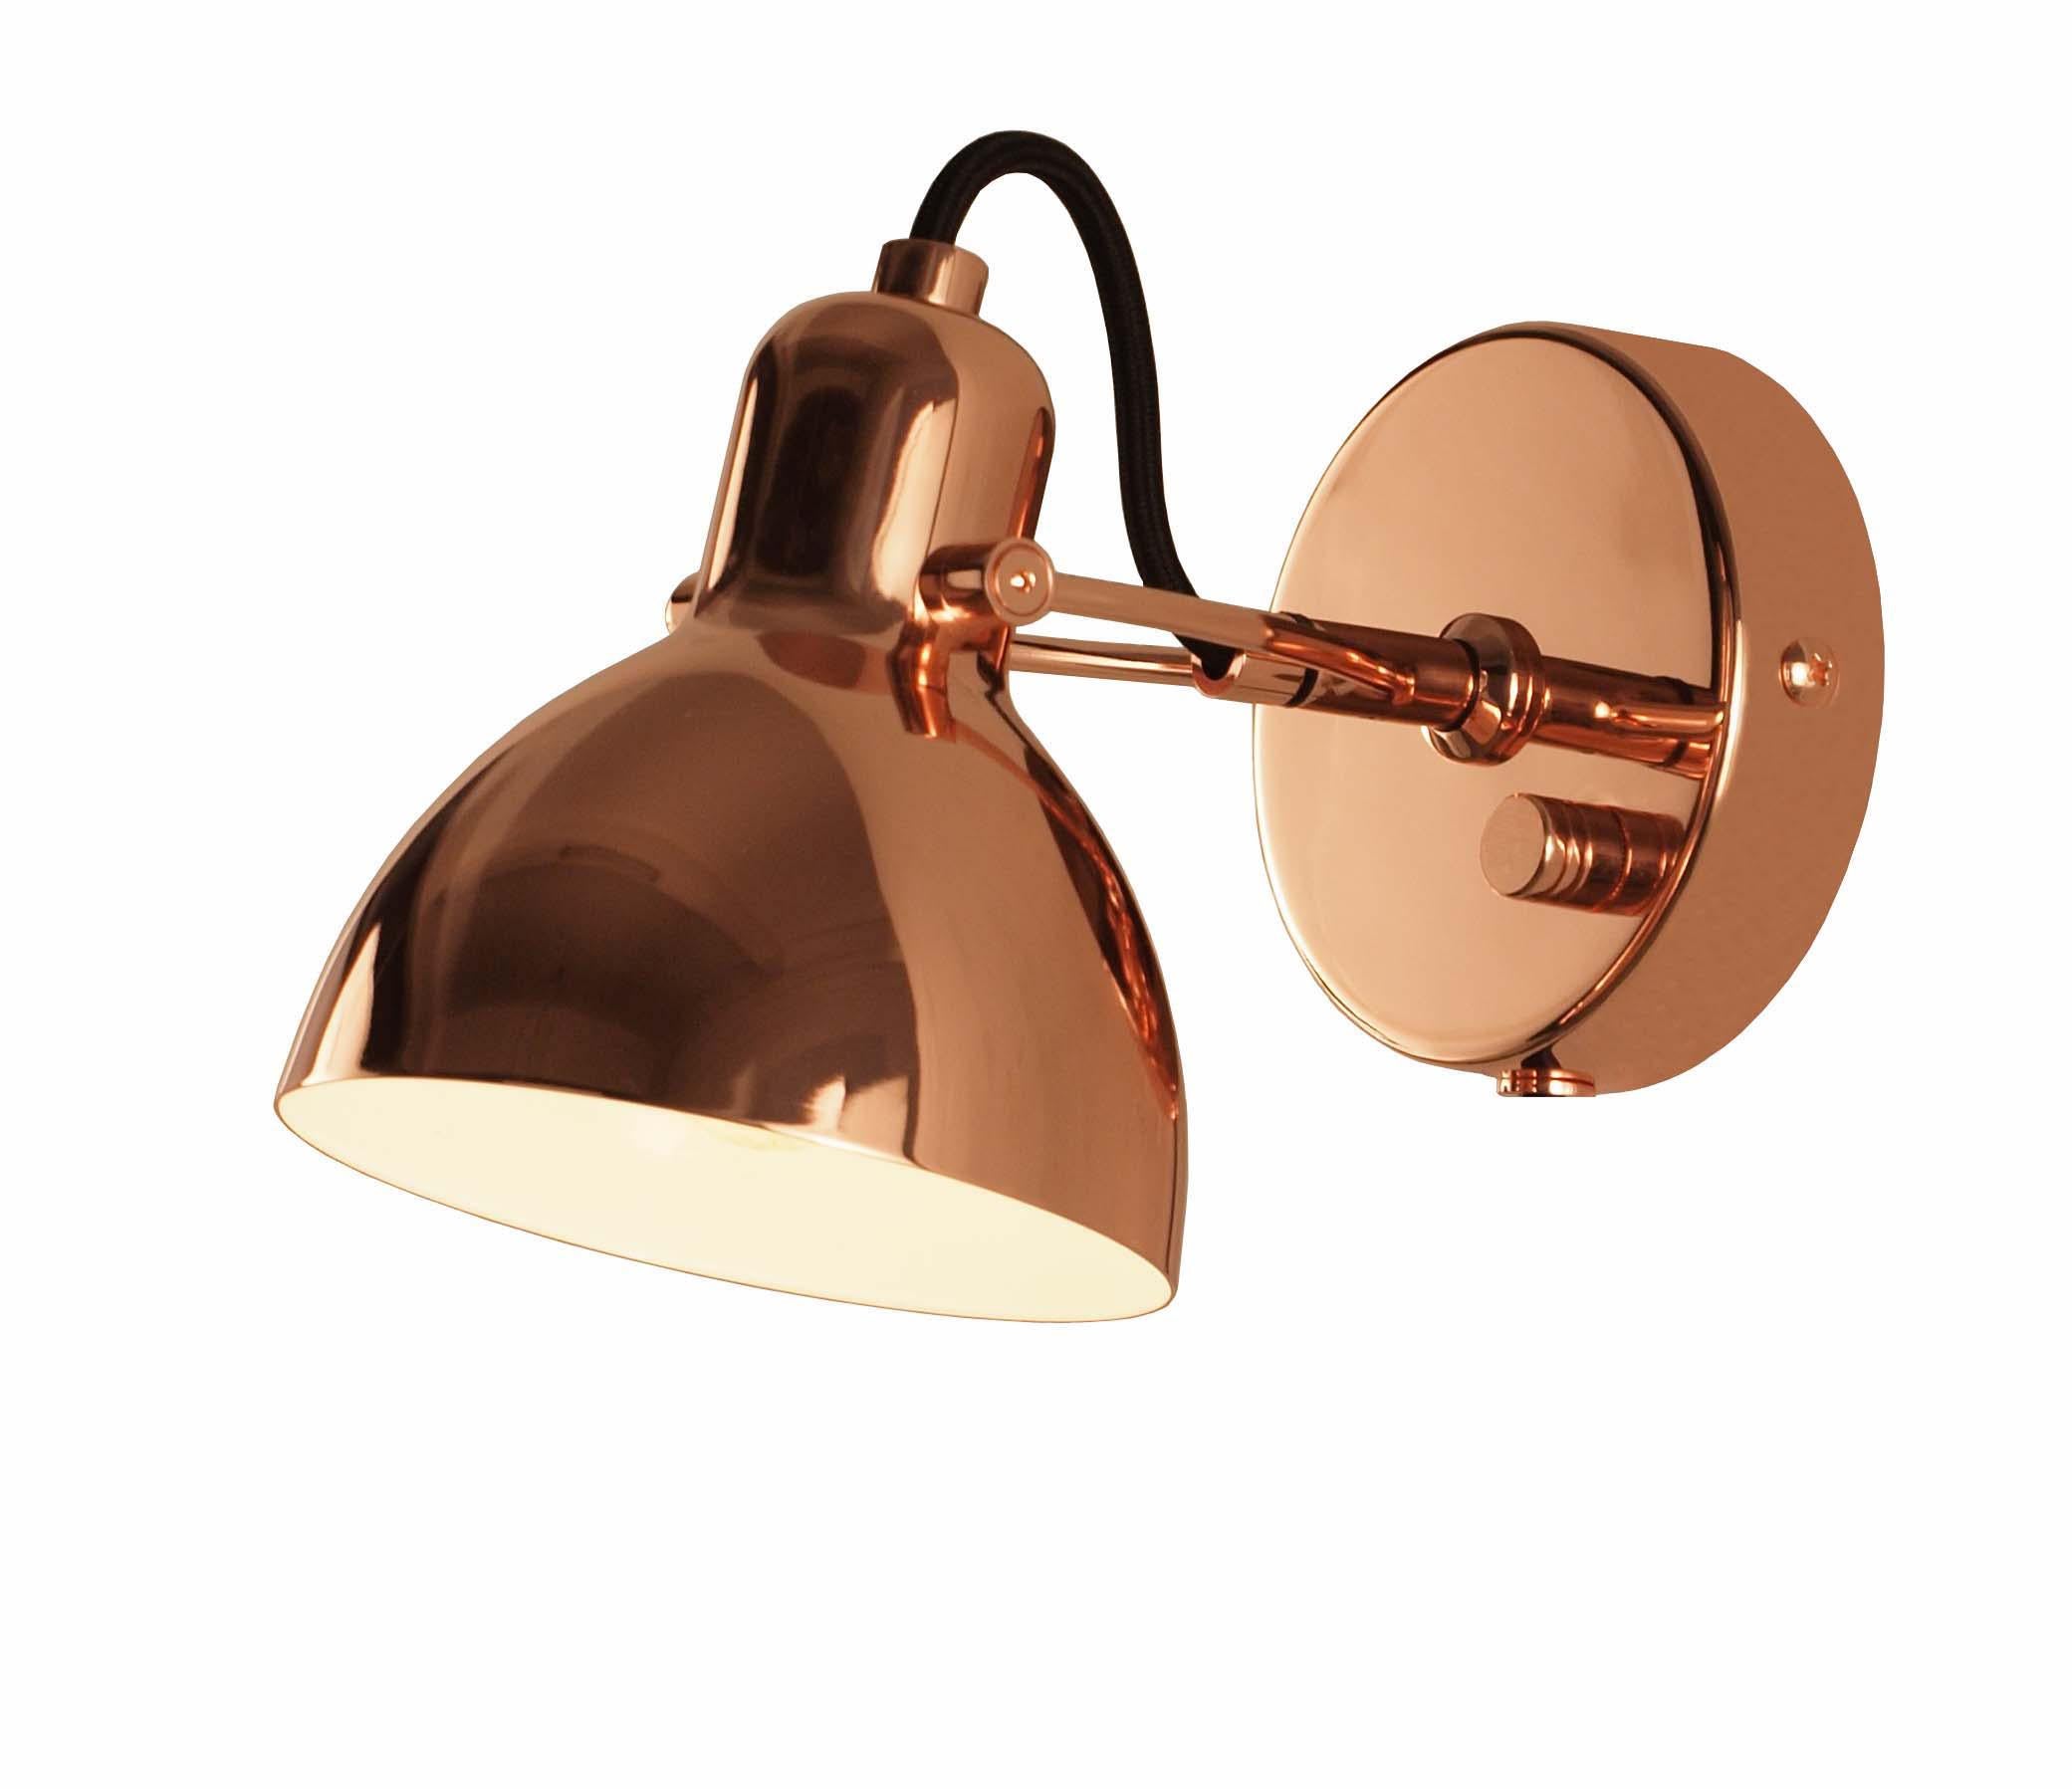 LAITO collection is a tribute to vintage designs. Inherited the classical streamline, LAITO MINI Wall Sconce amends the size to be more flexible in especially limited spaces.

Material:
steel

Color:
Matt brass / Copper / Chrome

Light